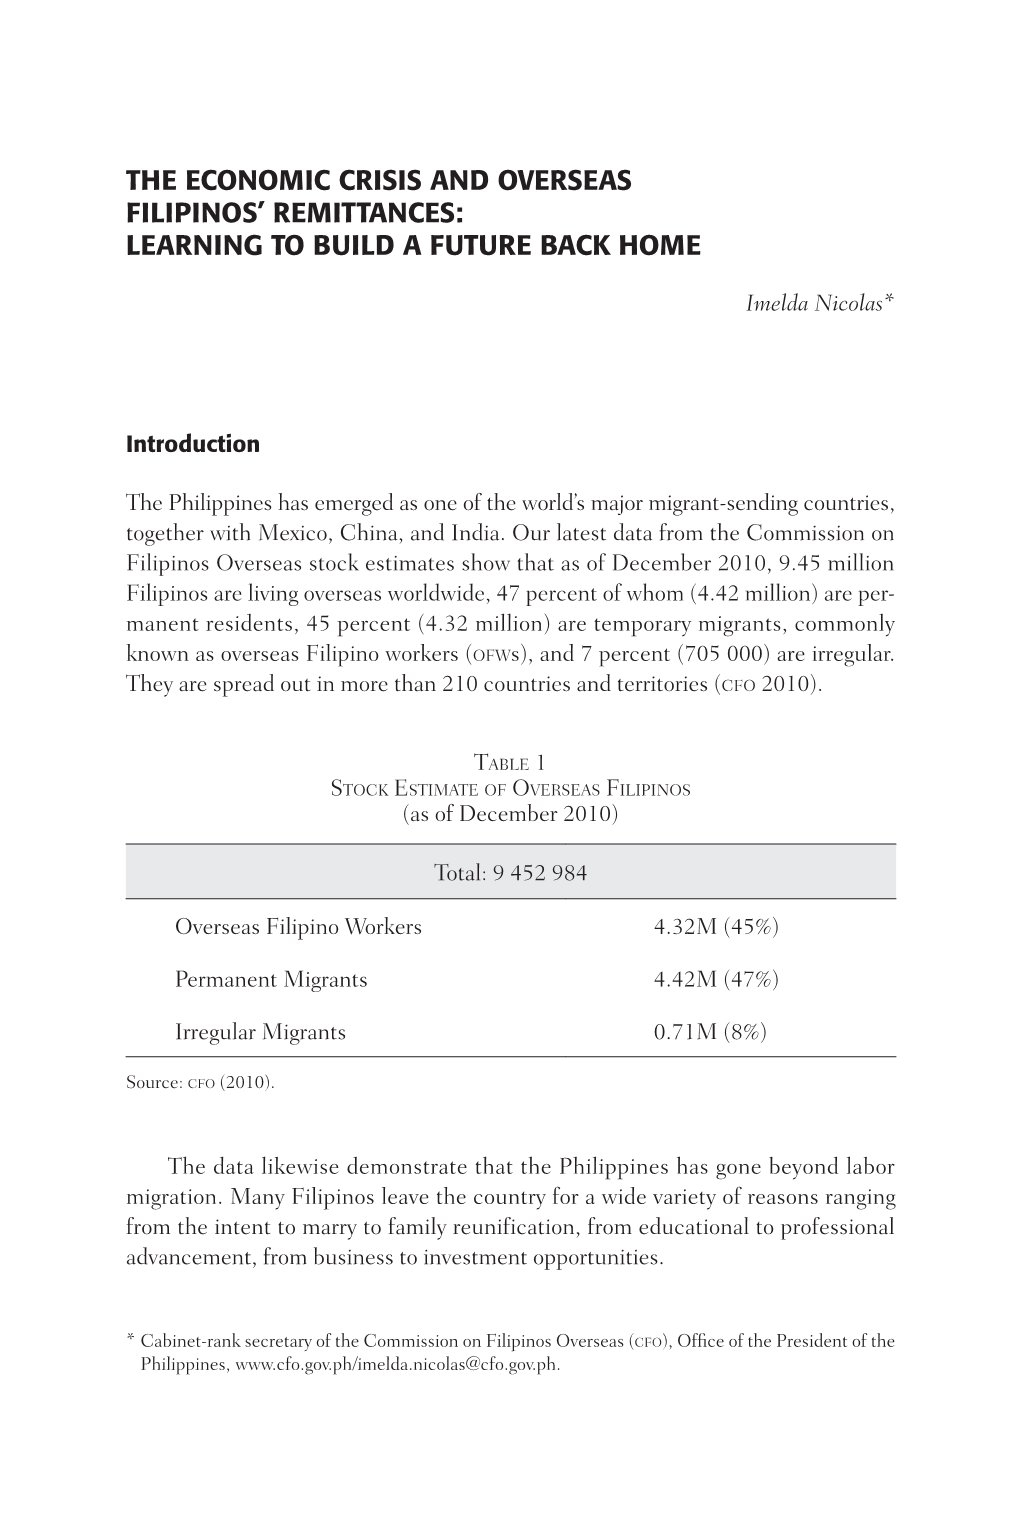 The Economic Crisis and Overseas Filipinos’ Remittances: Learning to Build a Future Back Home